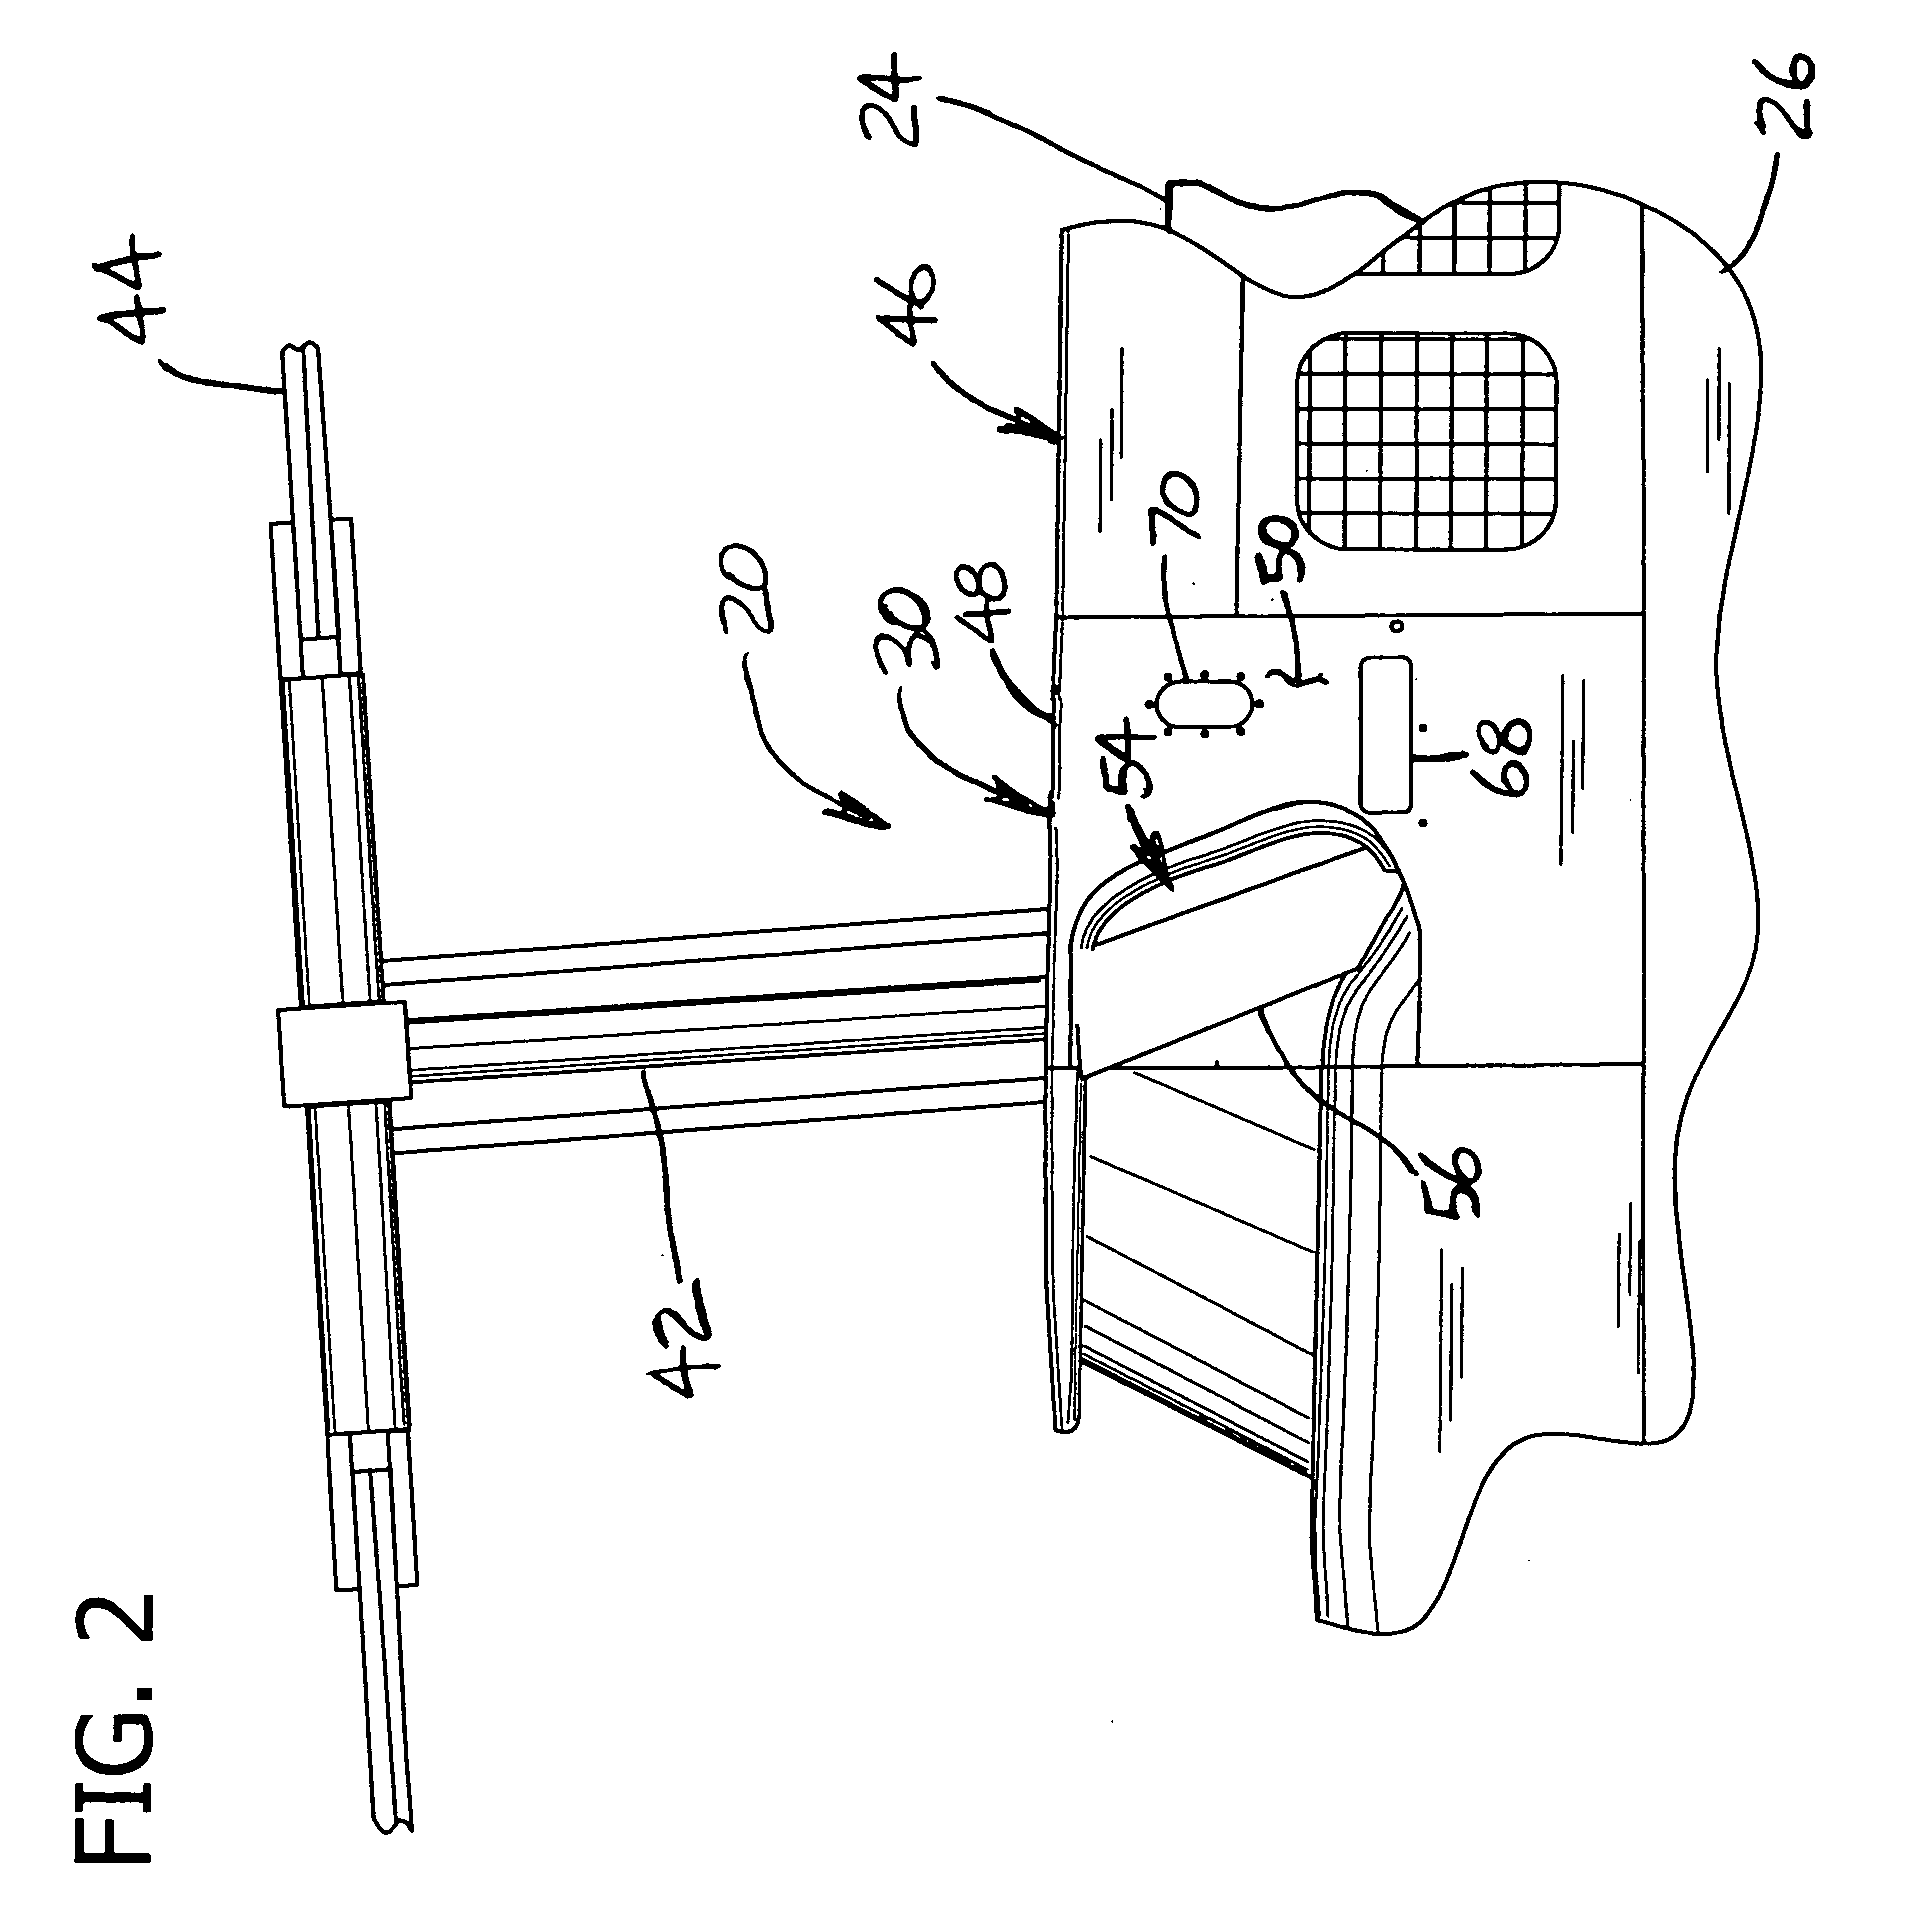 Engine intake system with accessible, interchangeable air filters